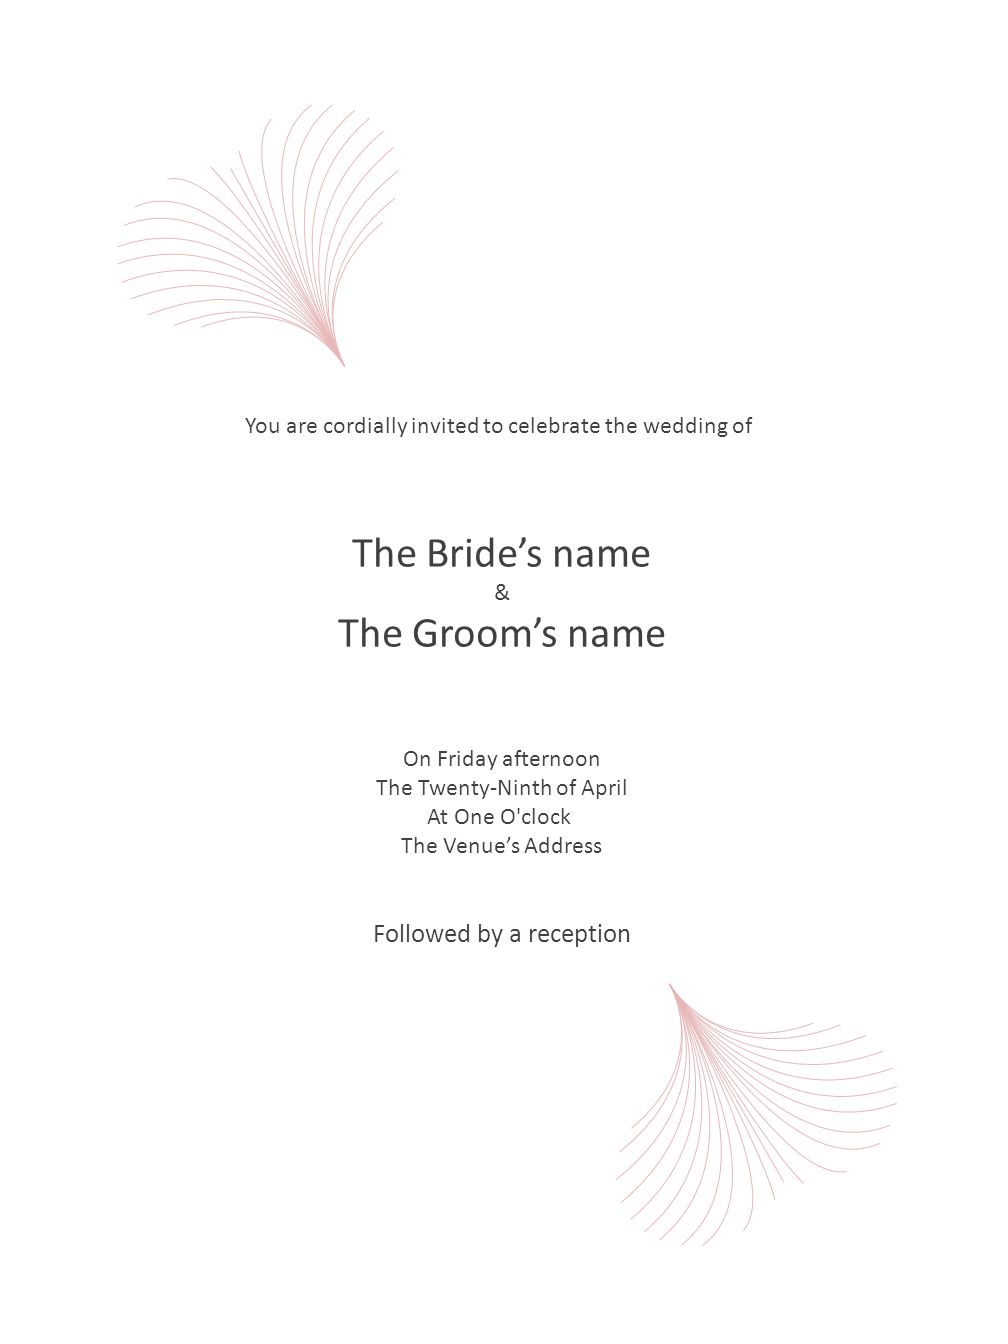 The Bride’s name The Groom’s name Followed by a reception